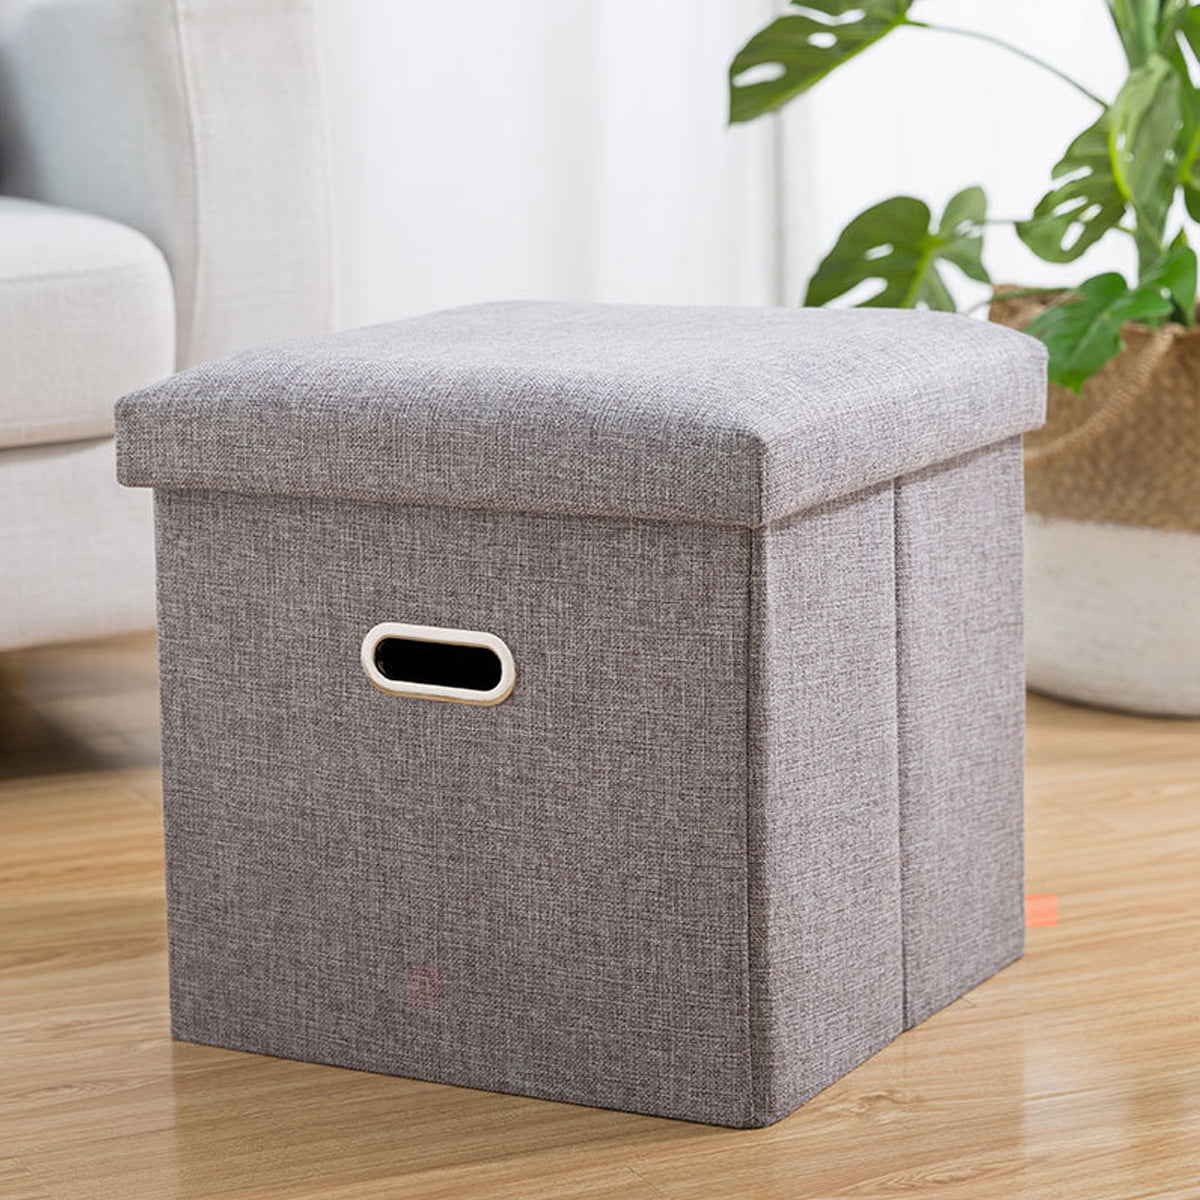 Natural Tufted Padded Seating Simplify Linen Folding Storage Ottoman Bench Double Toy Box Chest Stool Foot Rest